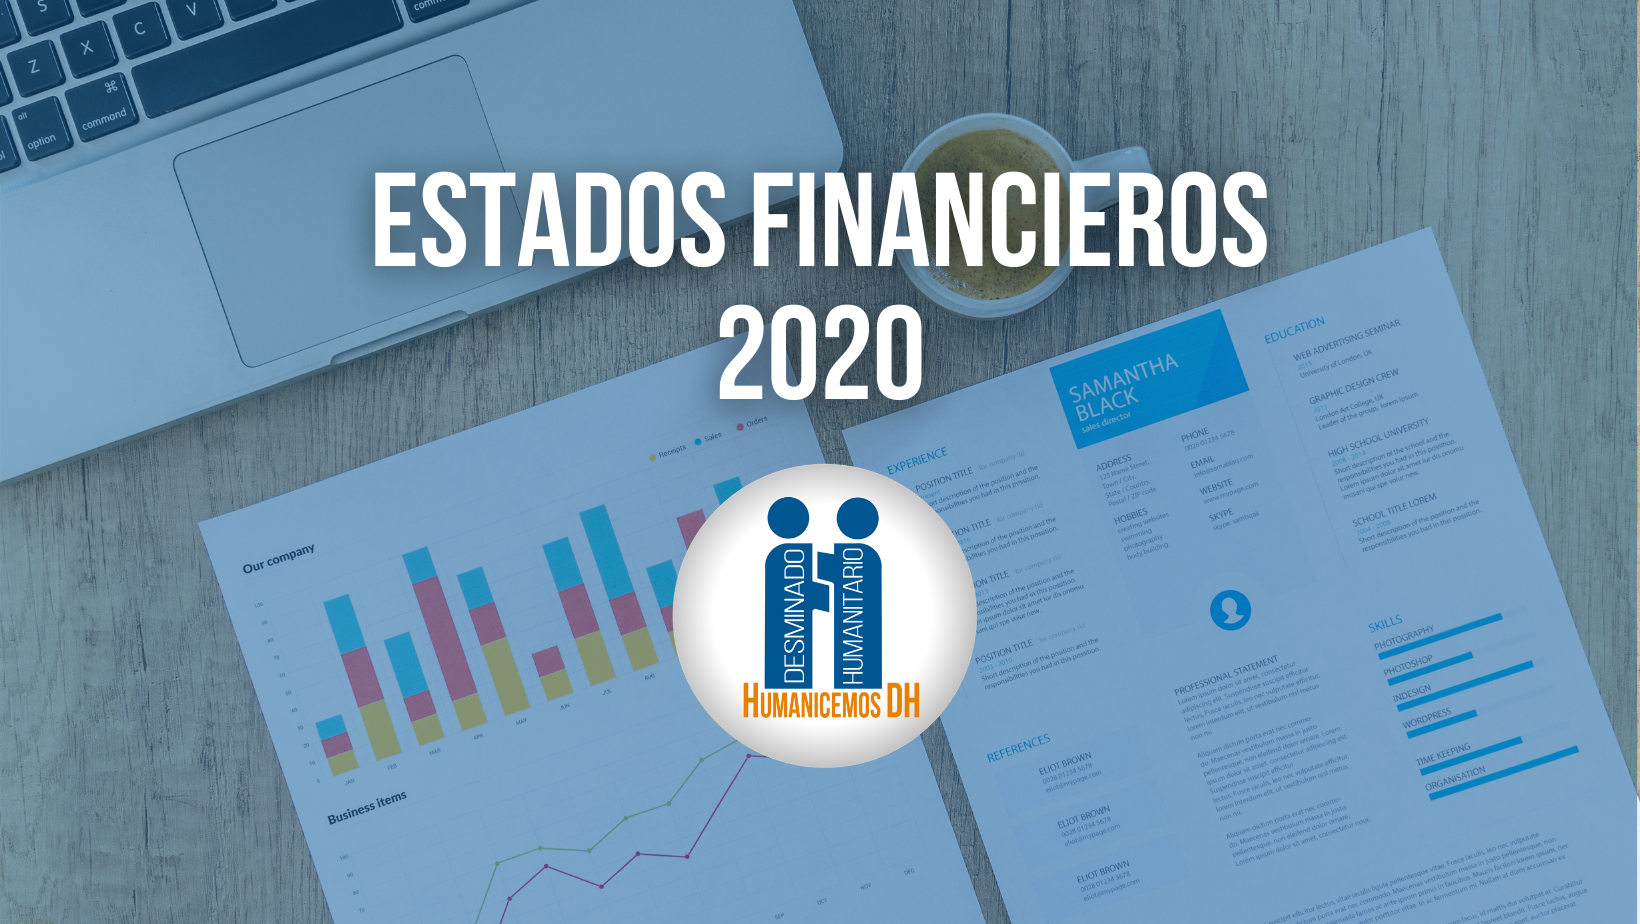 Financial Statements 2020 – HUMANICEMOS DH